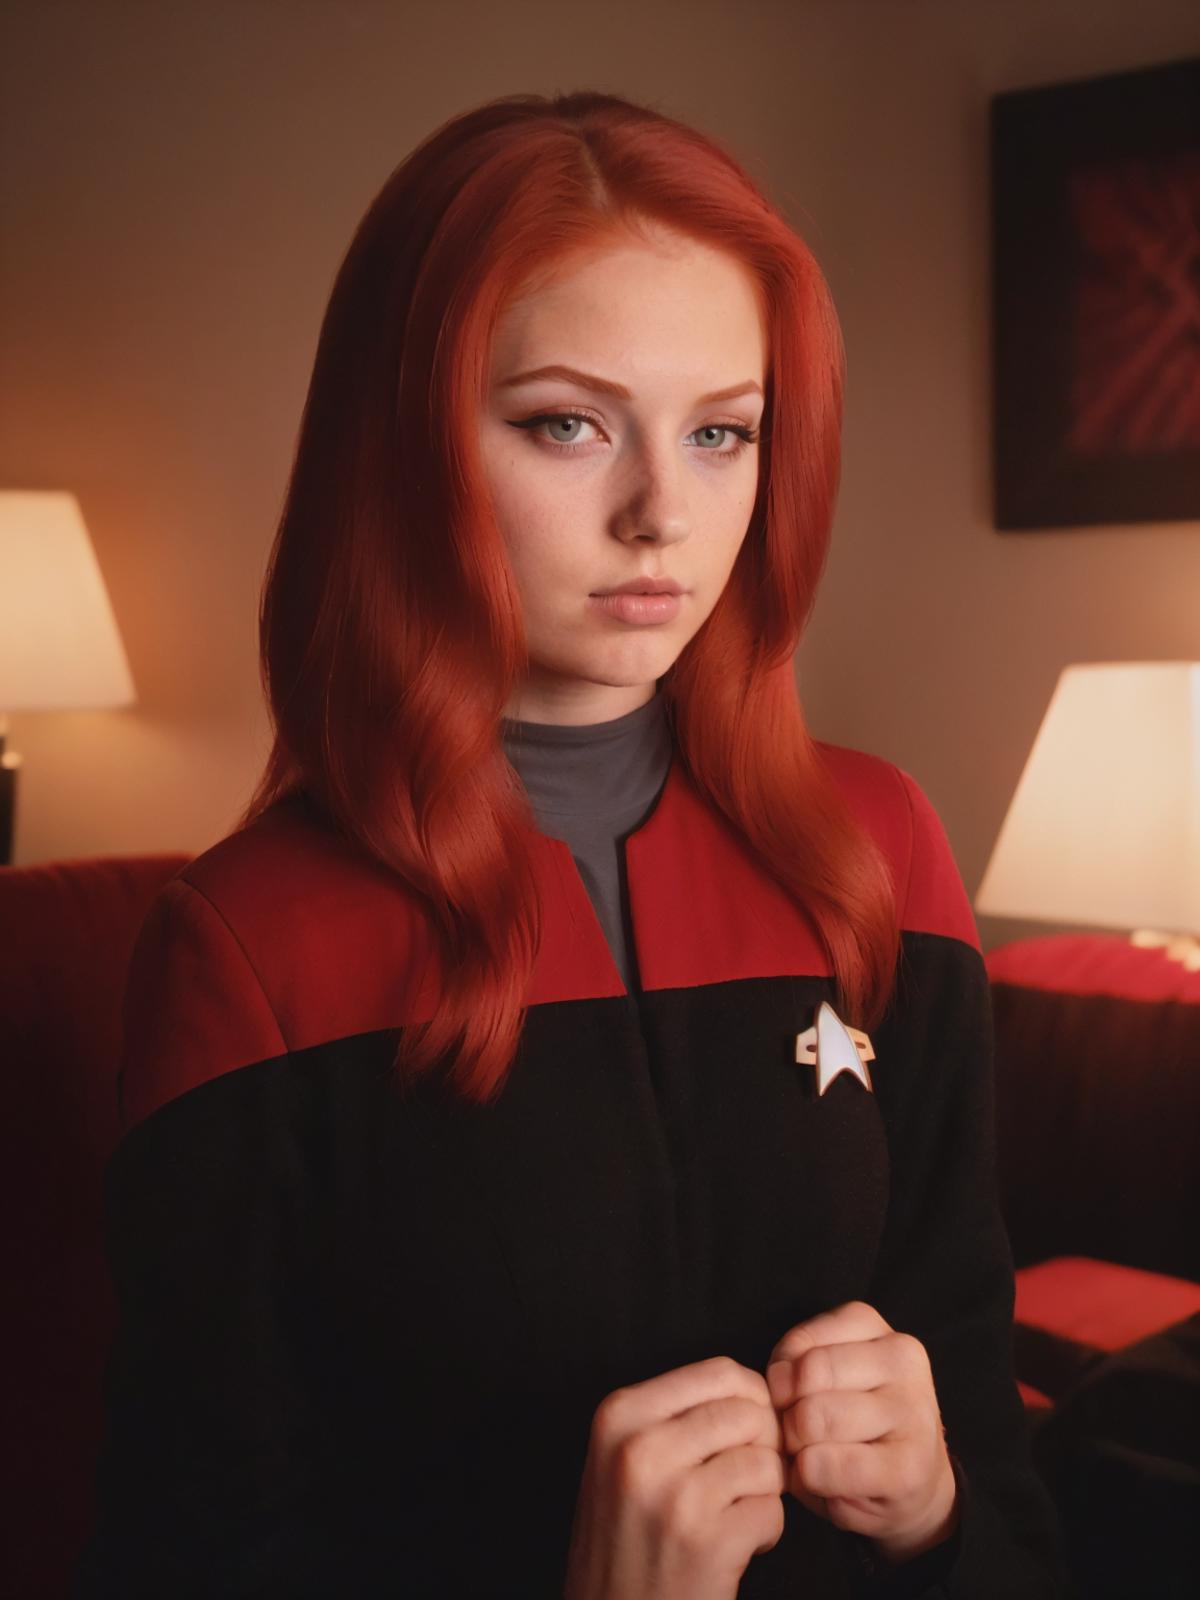 A woman wearing a Star Trek uniform with red hair looking into the camera.